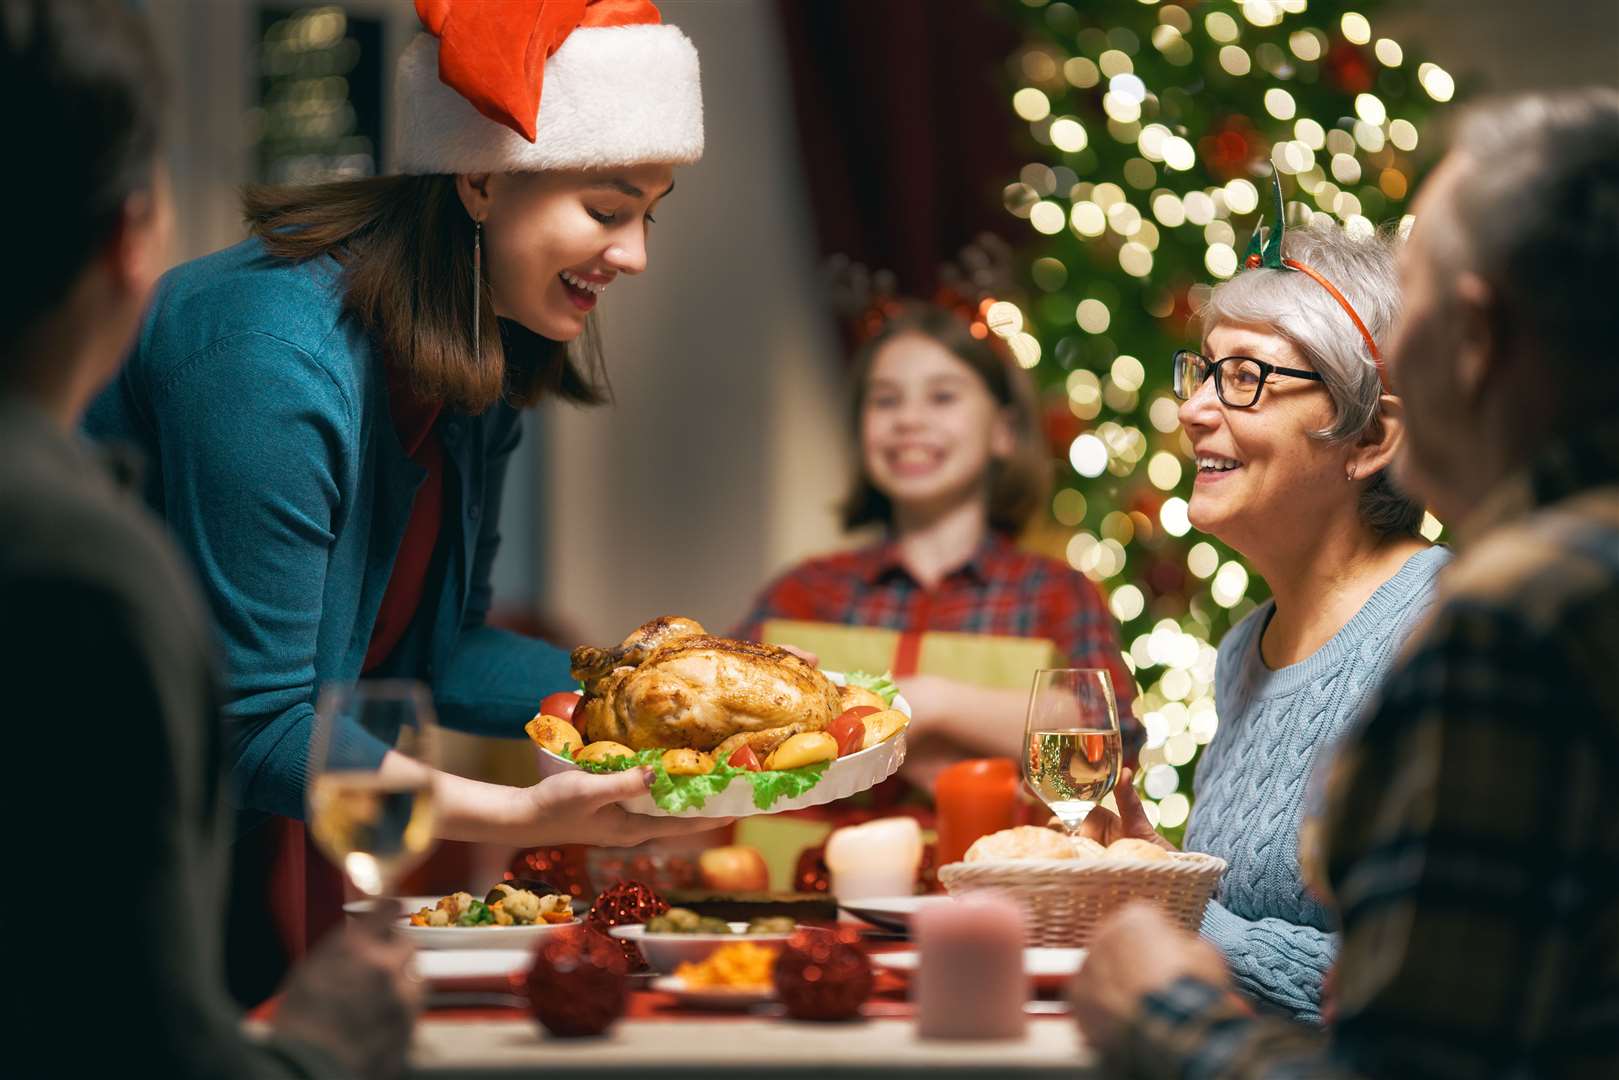 Will your family get together this Christmas?